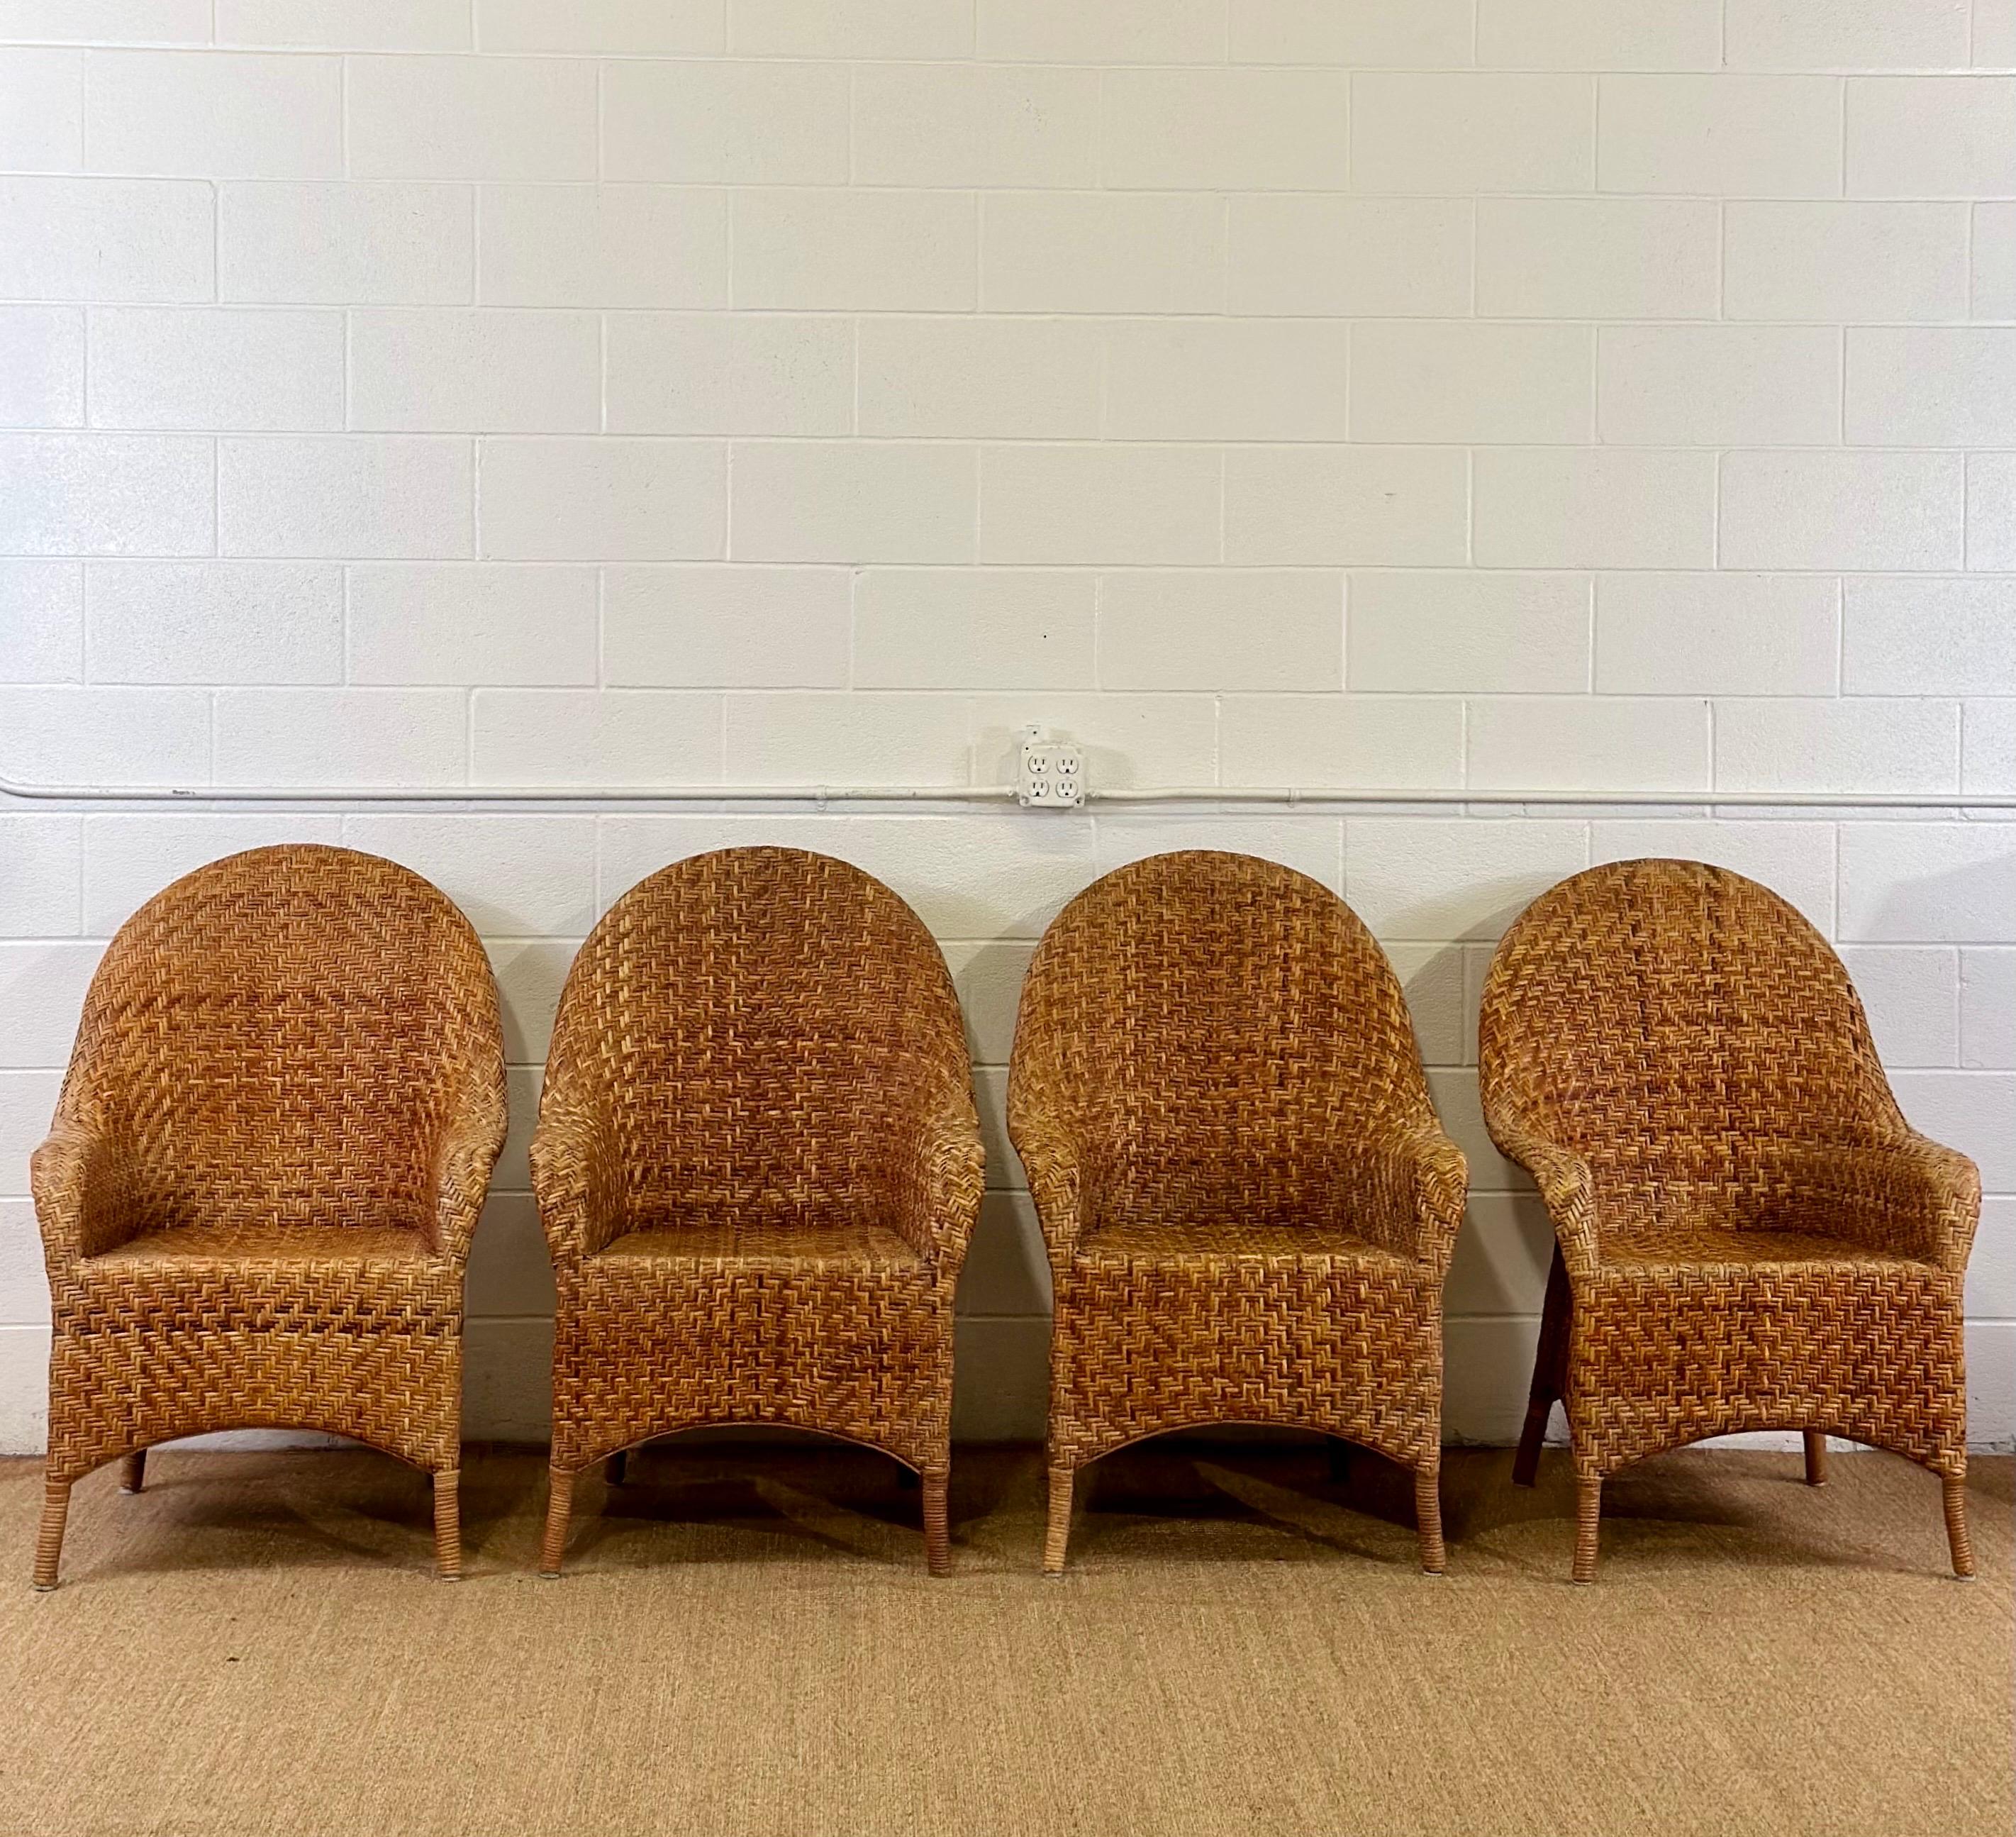 We are very pleased to offer a vintage set of four armchairs, circa the 1980s.  This set features an exquisite bamboo frame, artfully bent to provide both structural support and a graceful, inviting curvature.  The bamboo construction not only